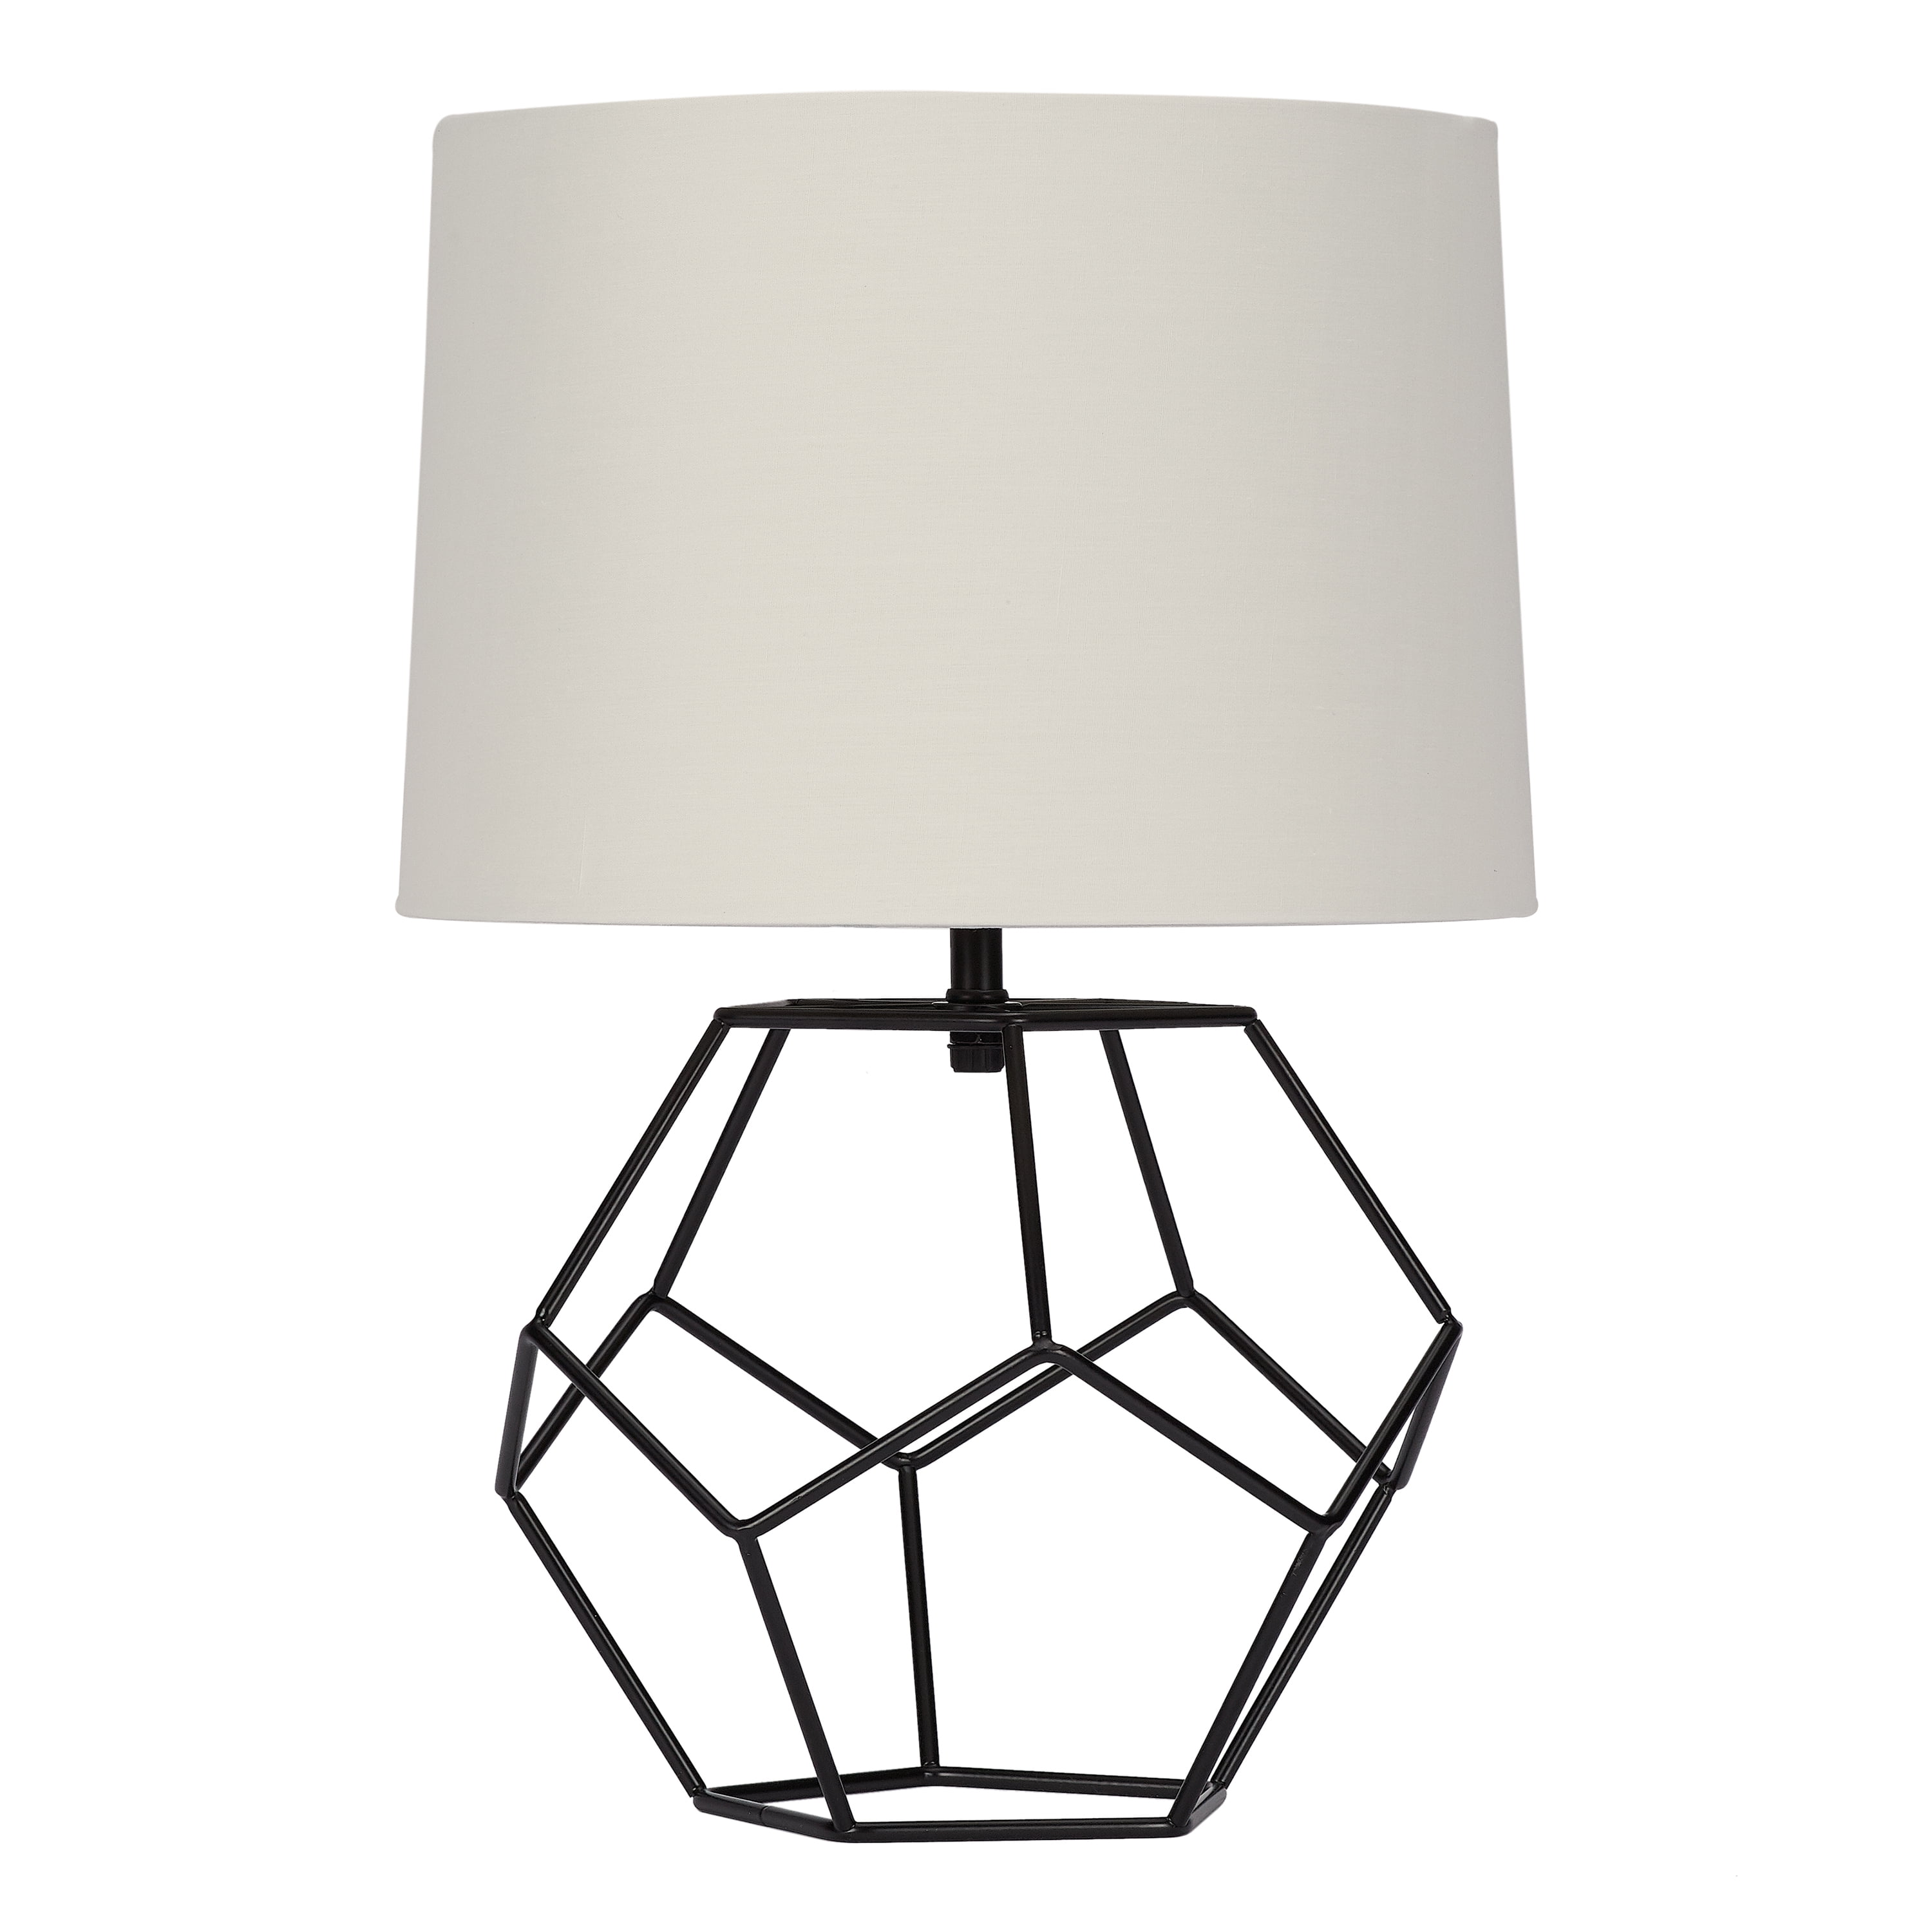 Cage Metal Base Table Lamp With Shade, Pencil Thin Table Lamps